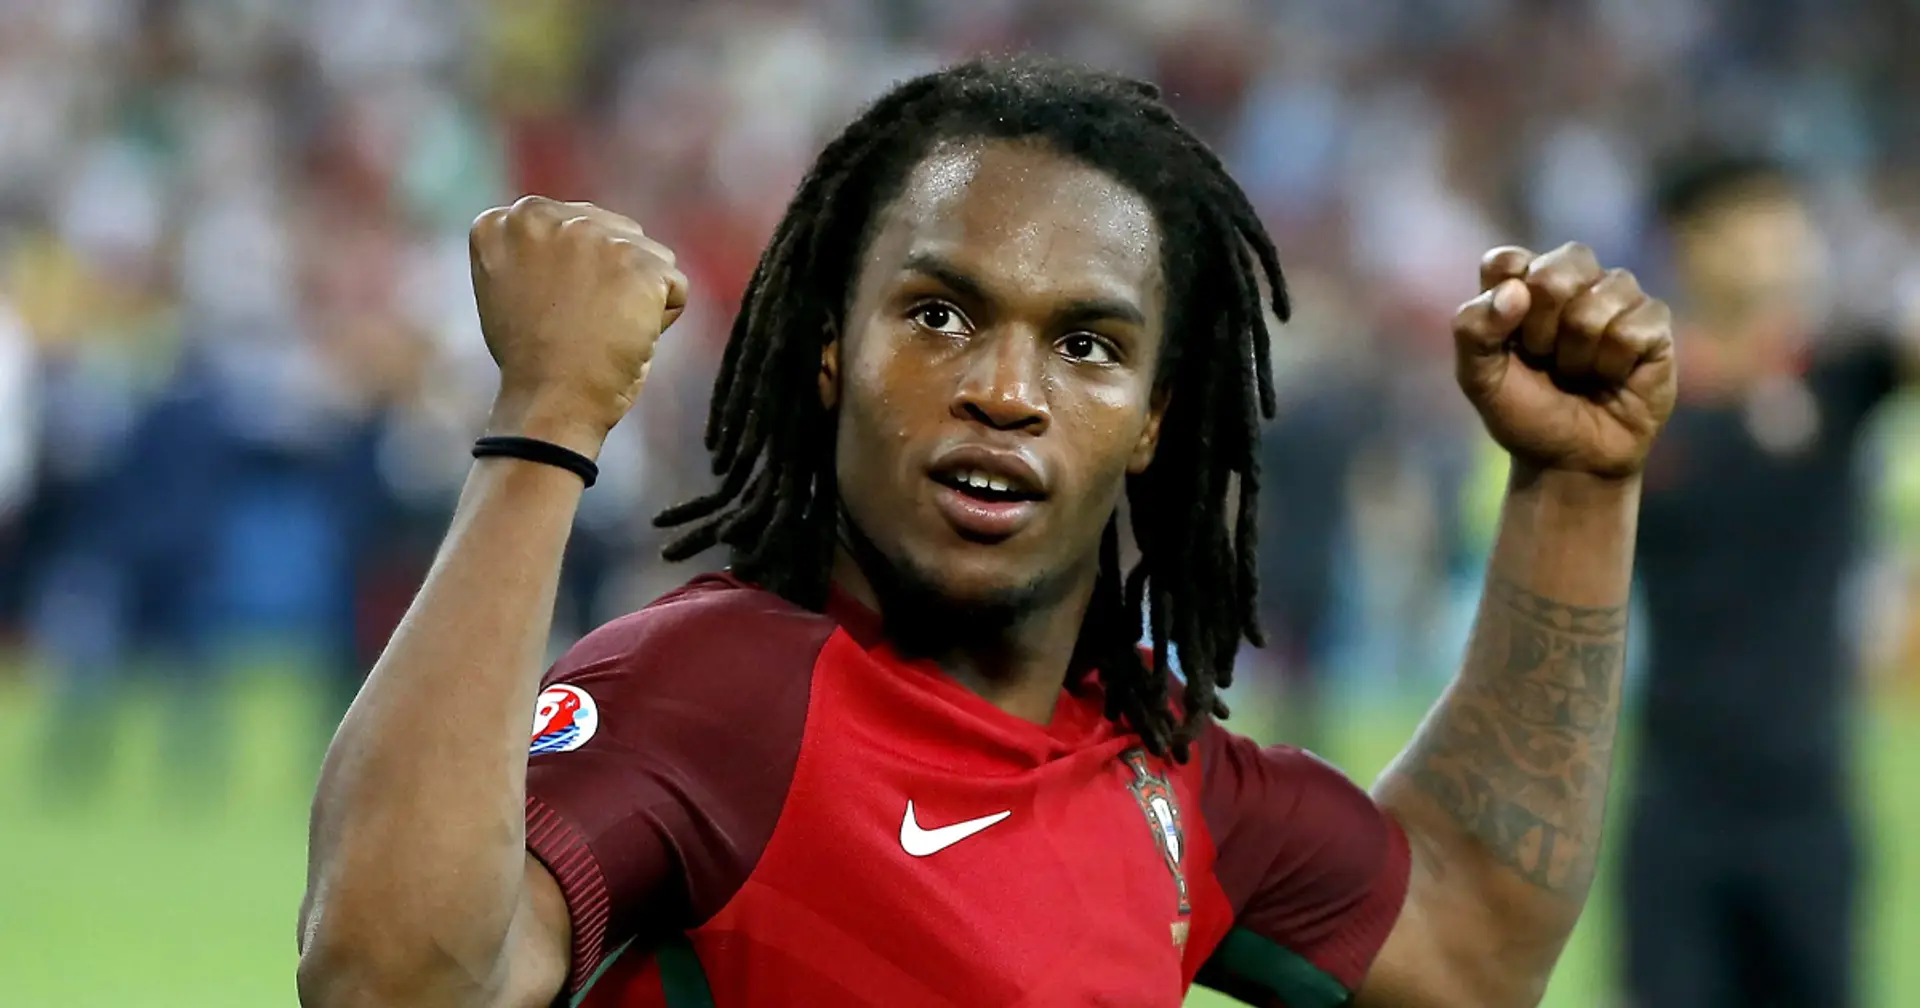 AC Milan close in on €20m deal for ex-Swansea flop Renato Sanches